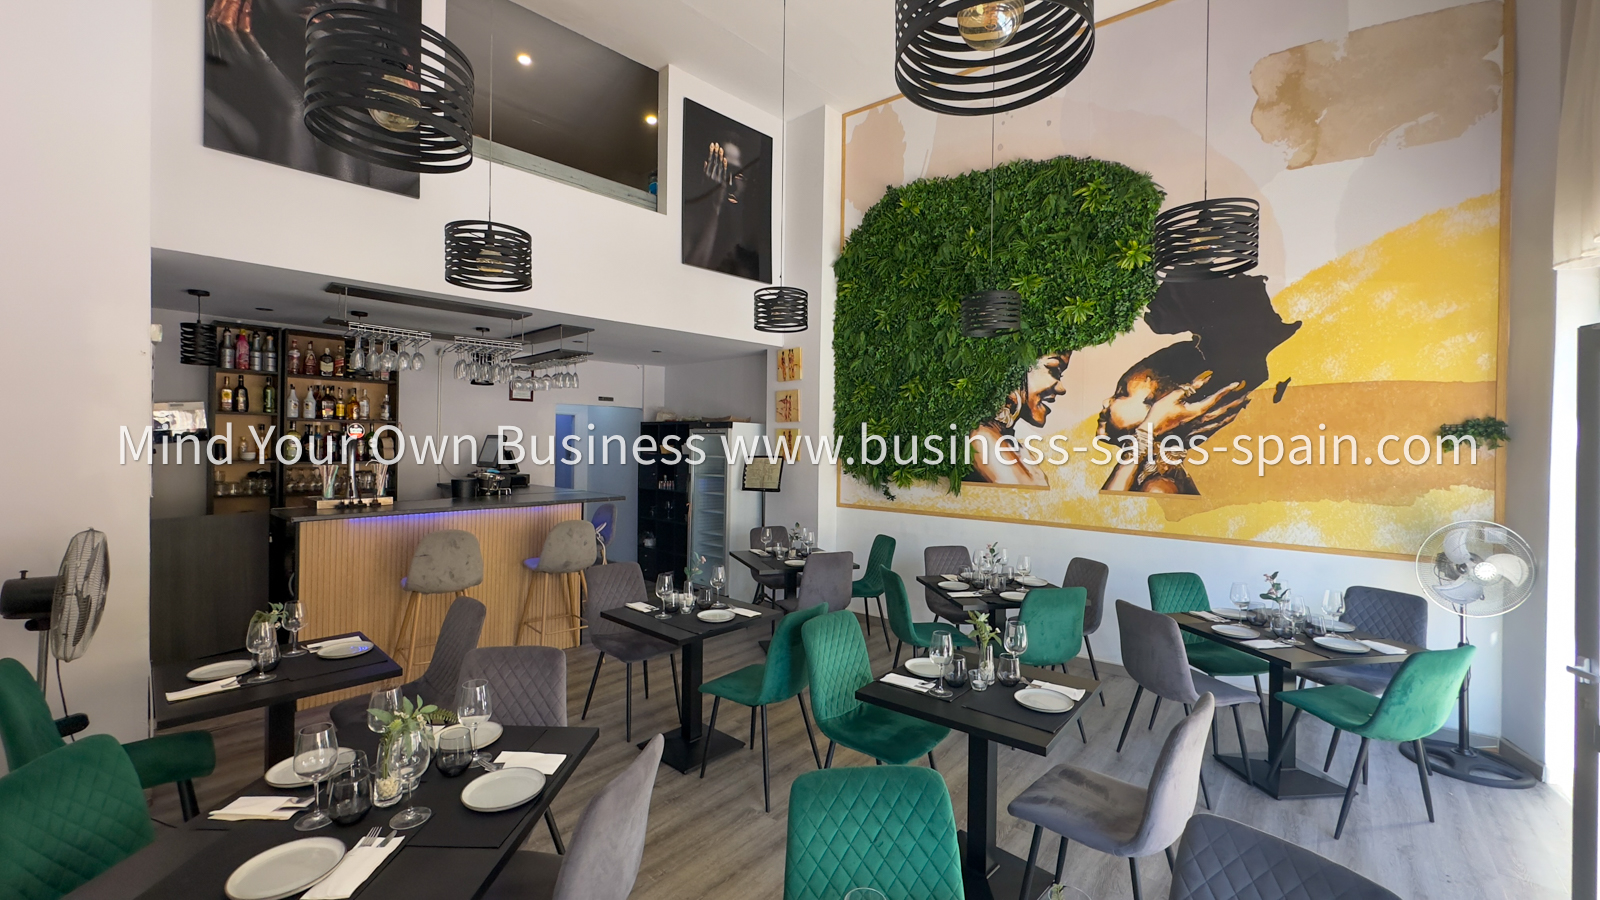 Good Size Modern Restaurant in High Profile and Busy Location in Marbella.